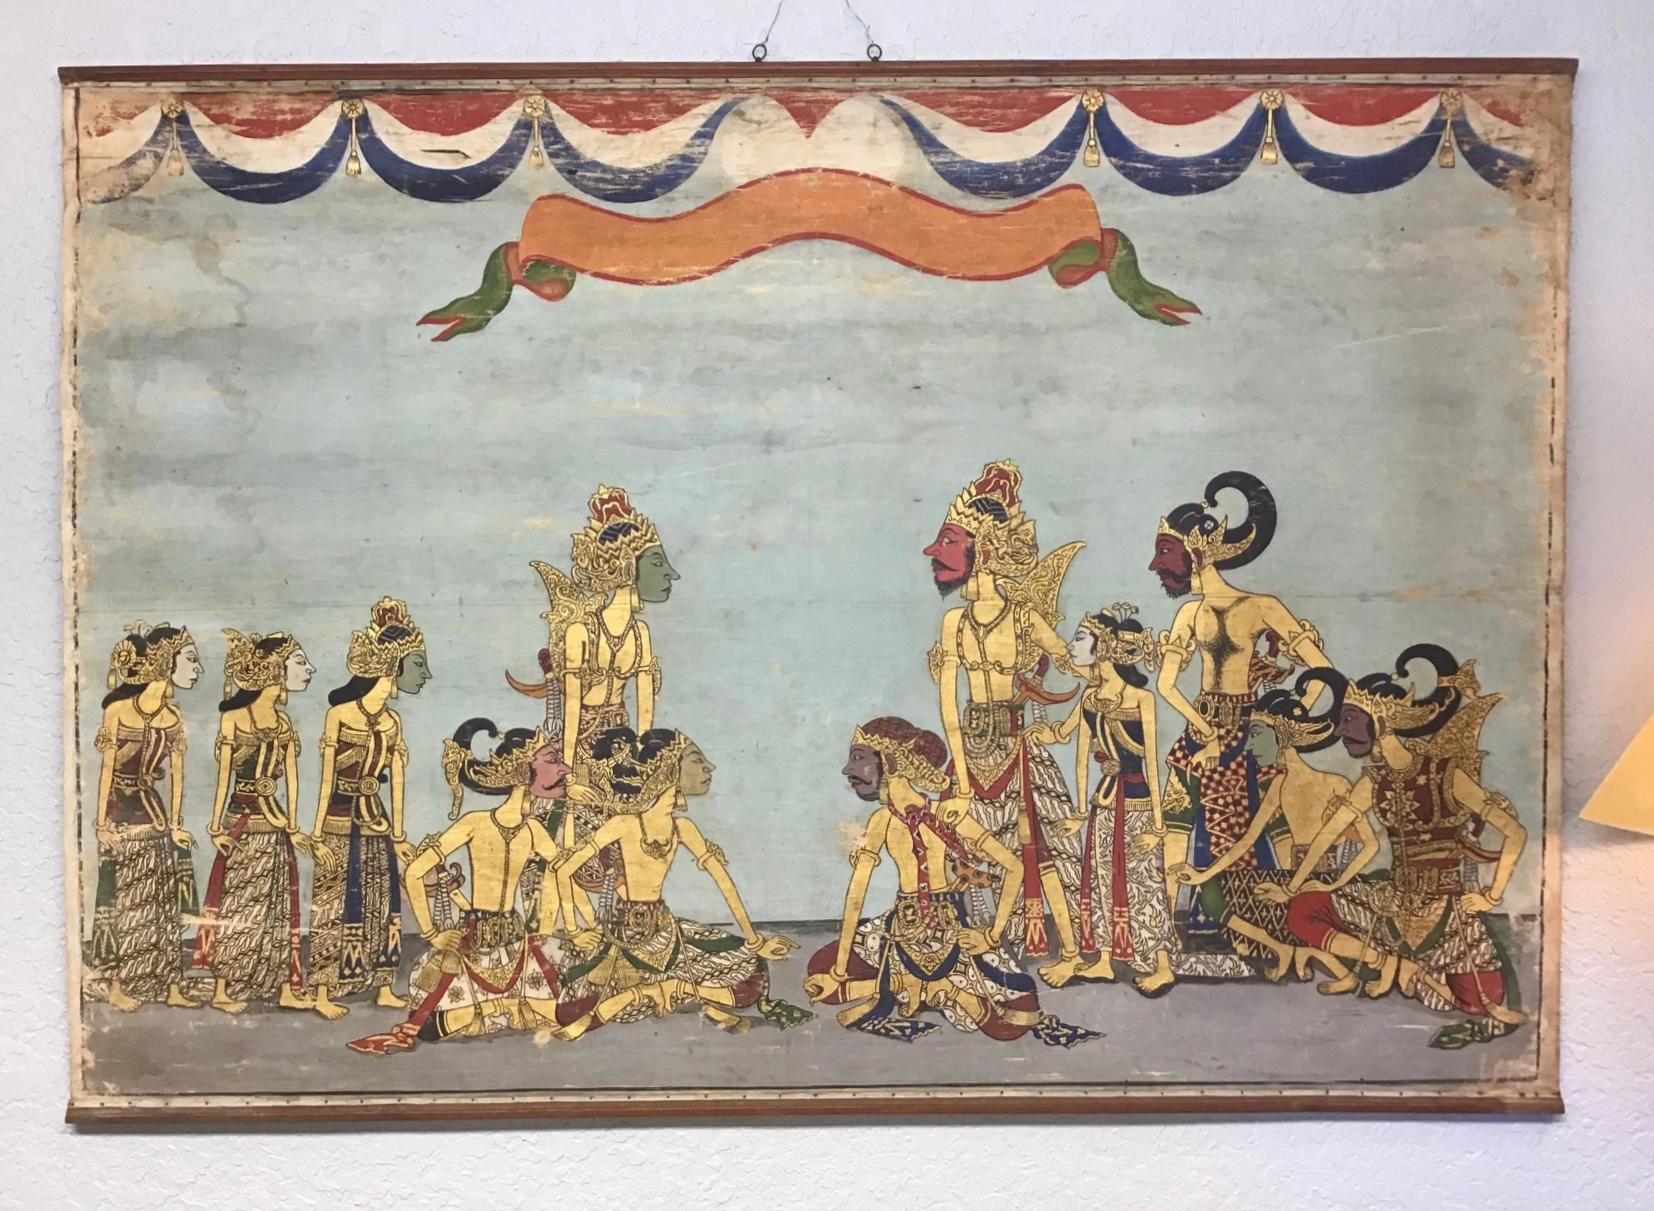 An antique painted cloth panel from India. May have been a back drop for a theater or a large wall hanging. It has a wonderful worn old patina and would add character to any setting.